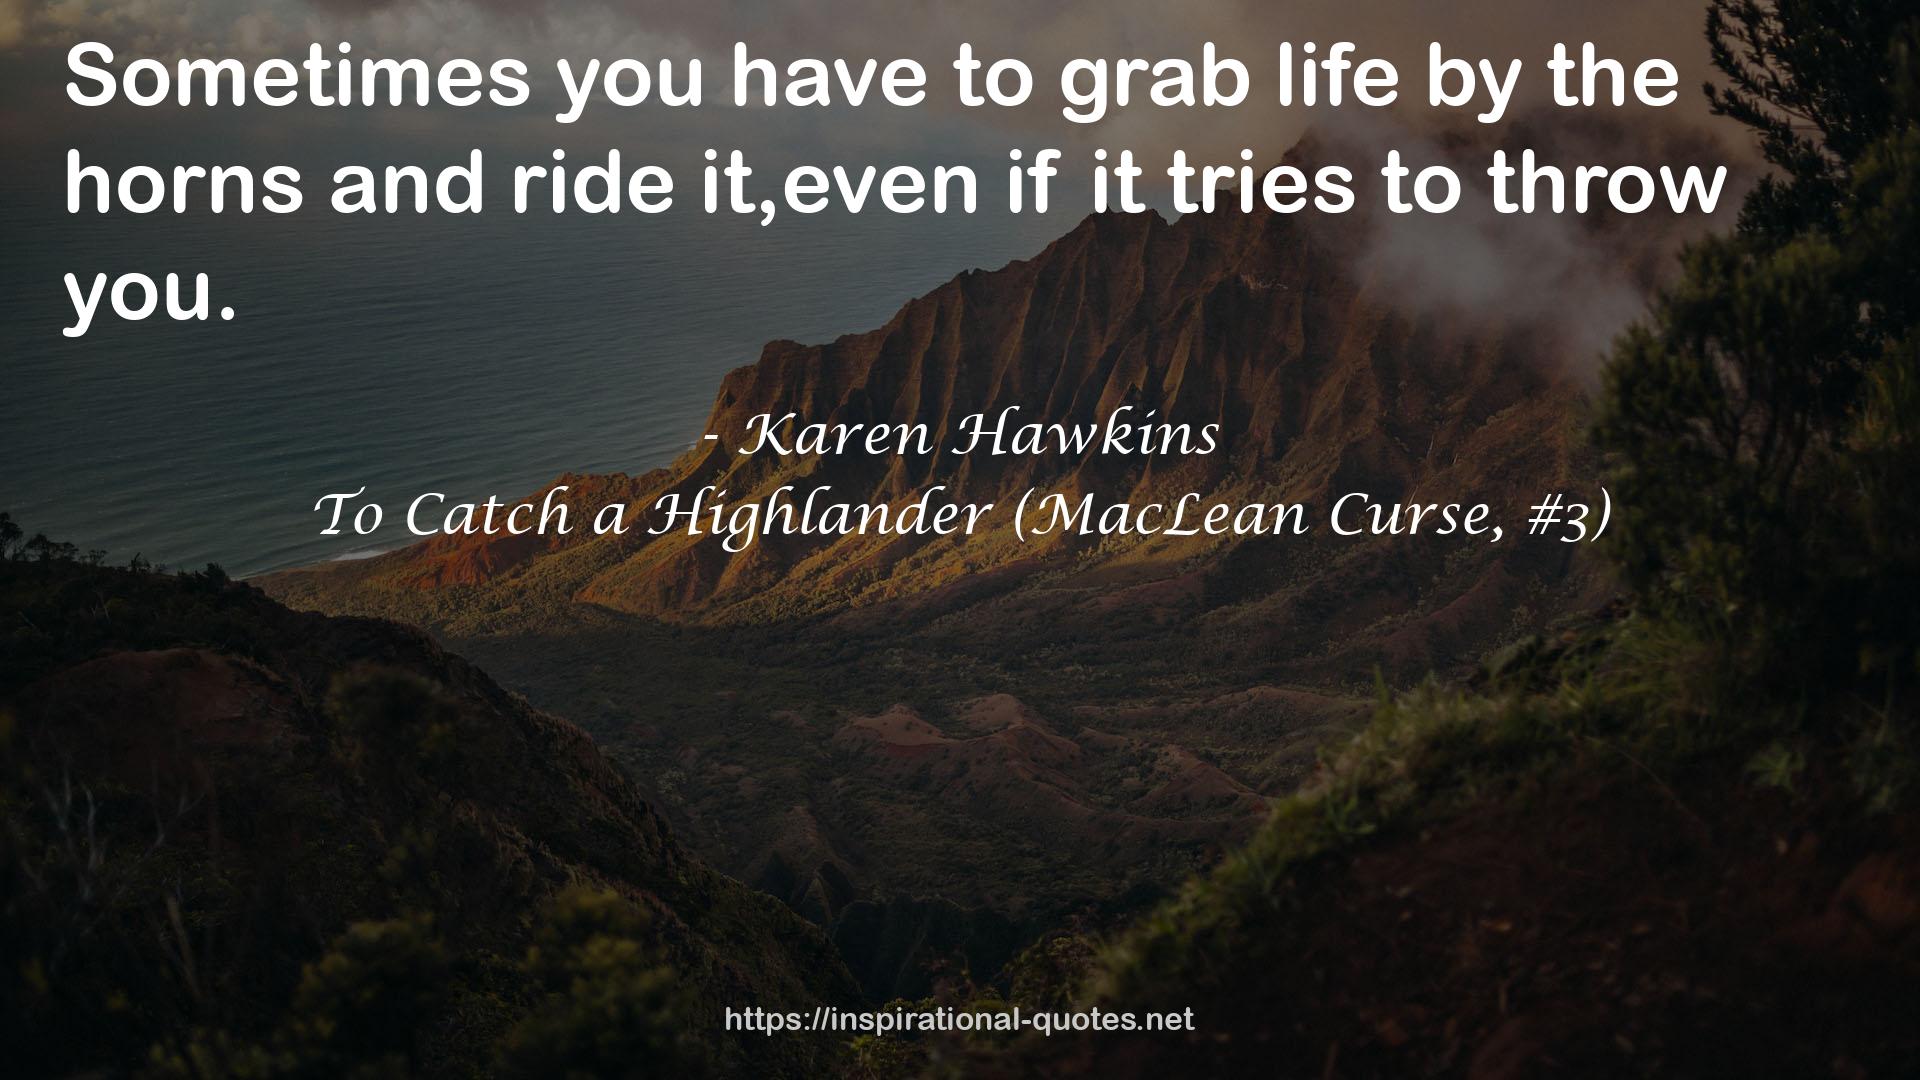 To Catch a Highlander (MacLean Curse, #3) QUOTES